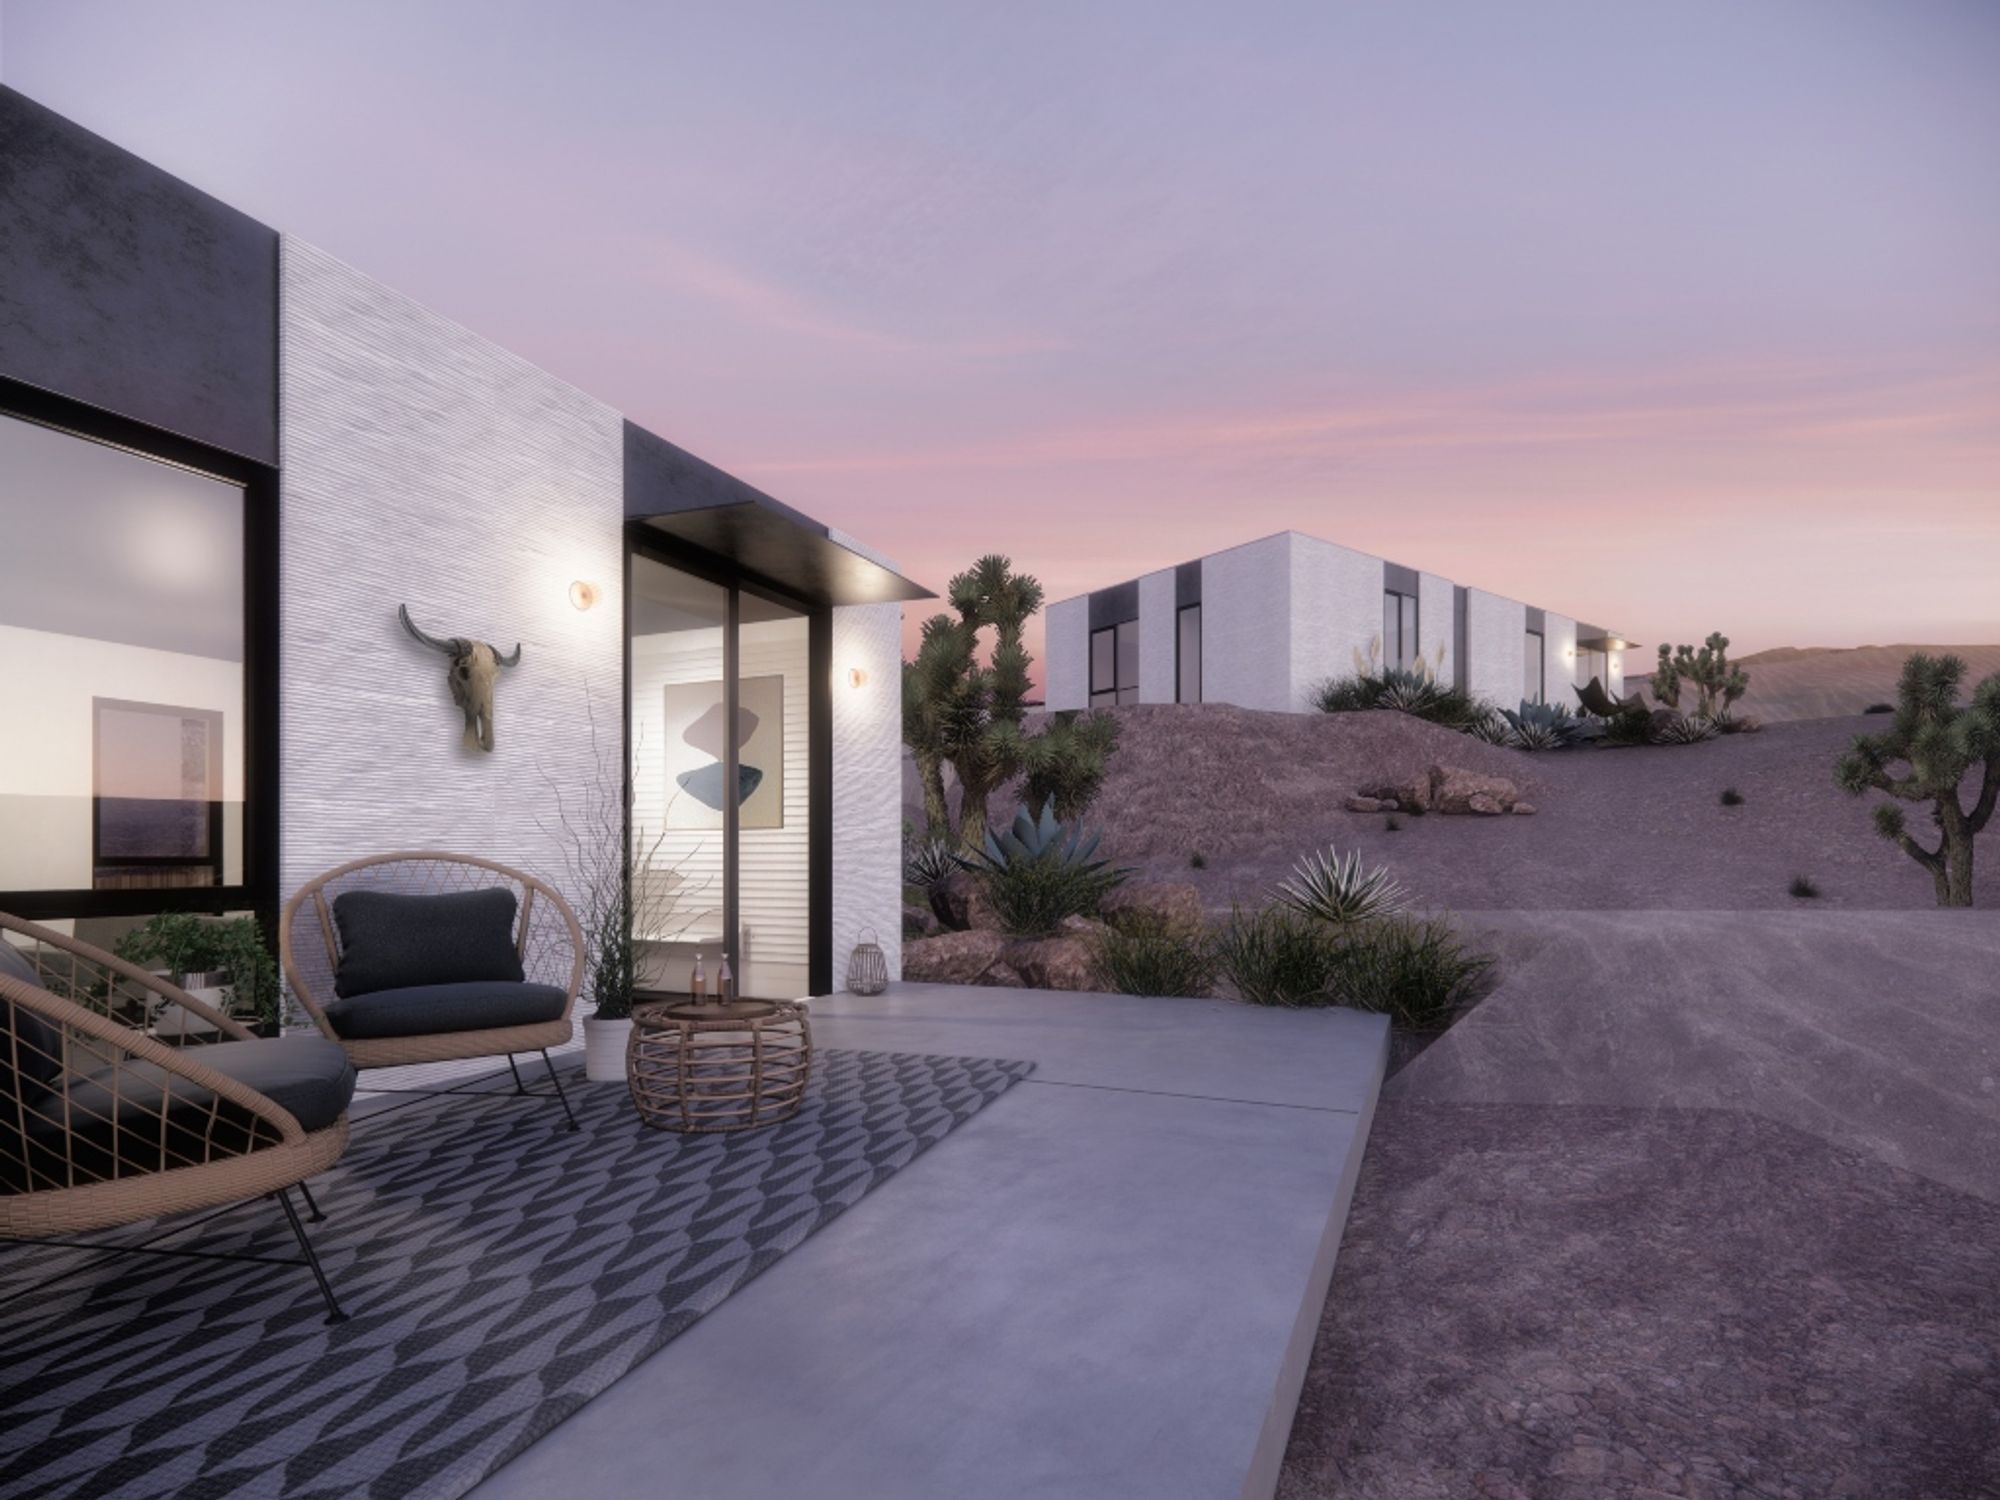 EYRC relies on 3D printing technology to create affordable, mass-manufactured net-zero dwellings in response to California's housing crisis - Global Design News